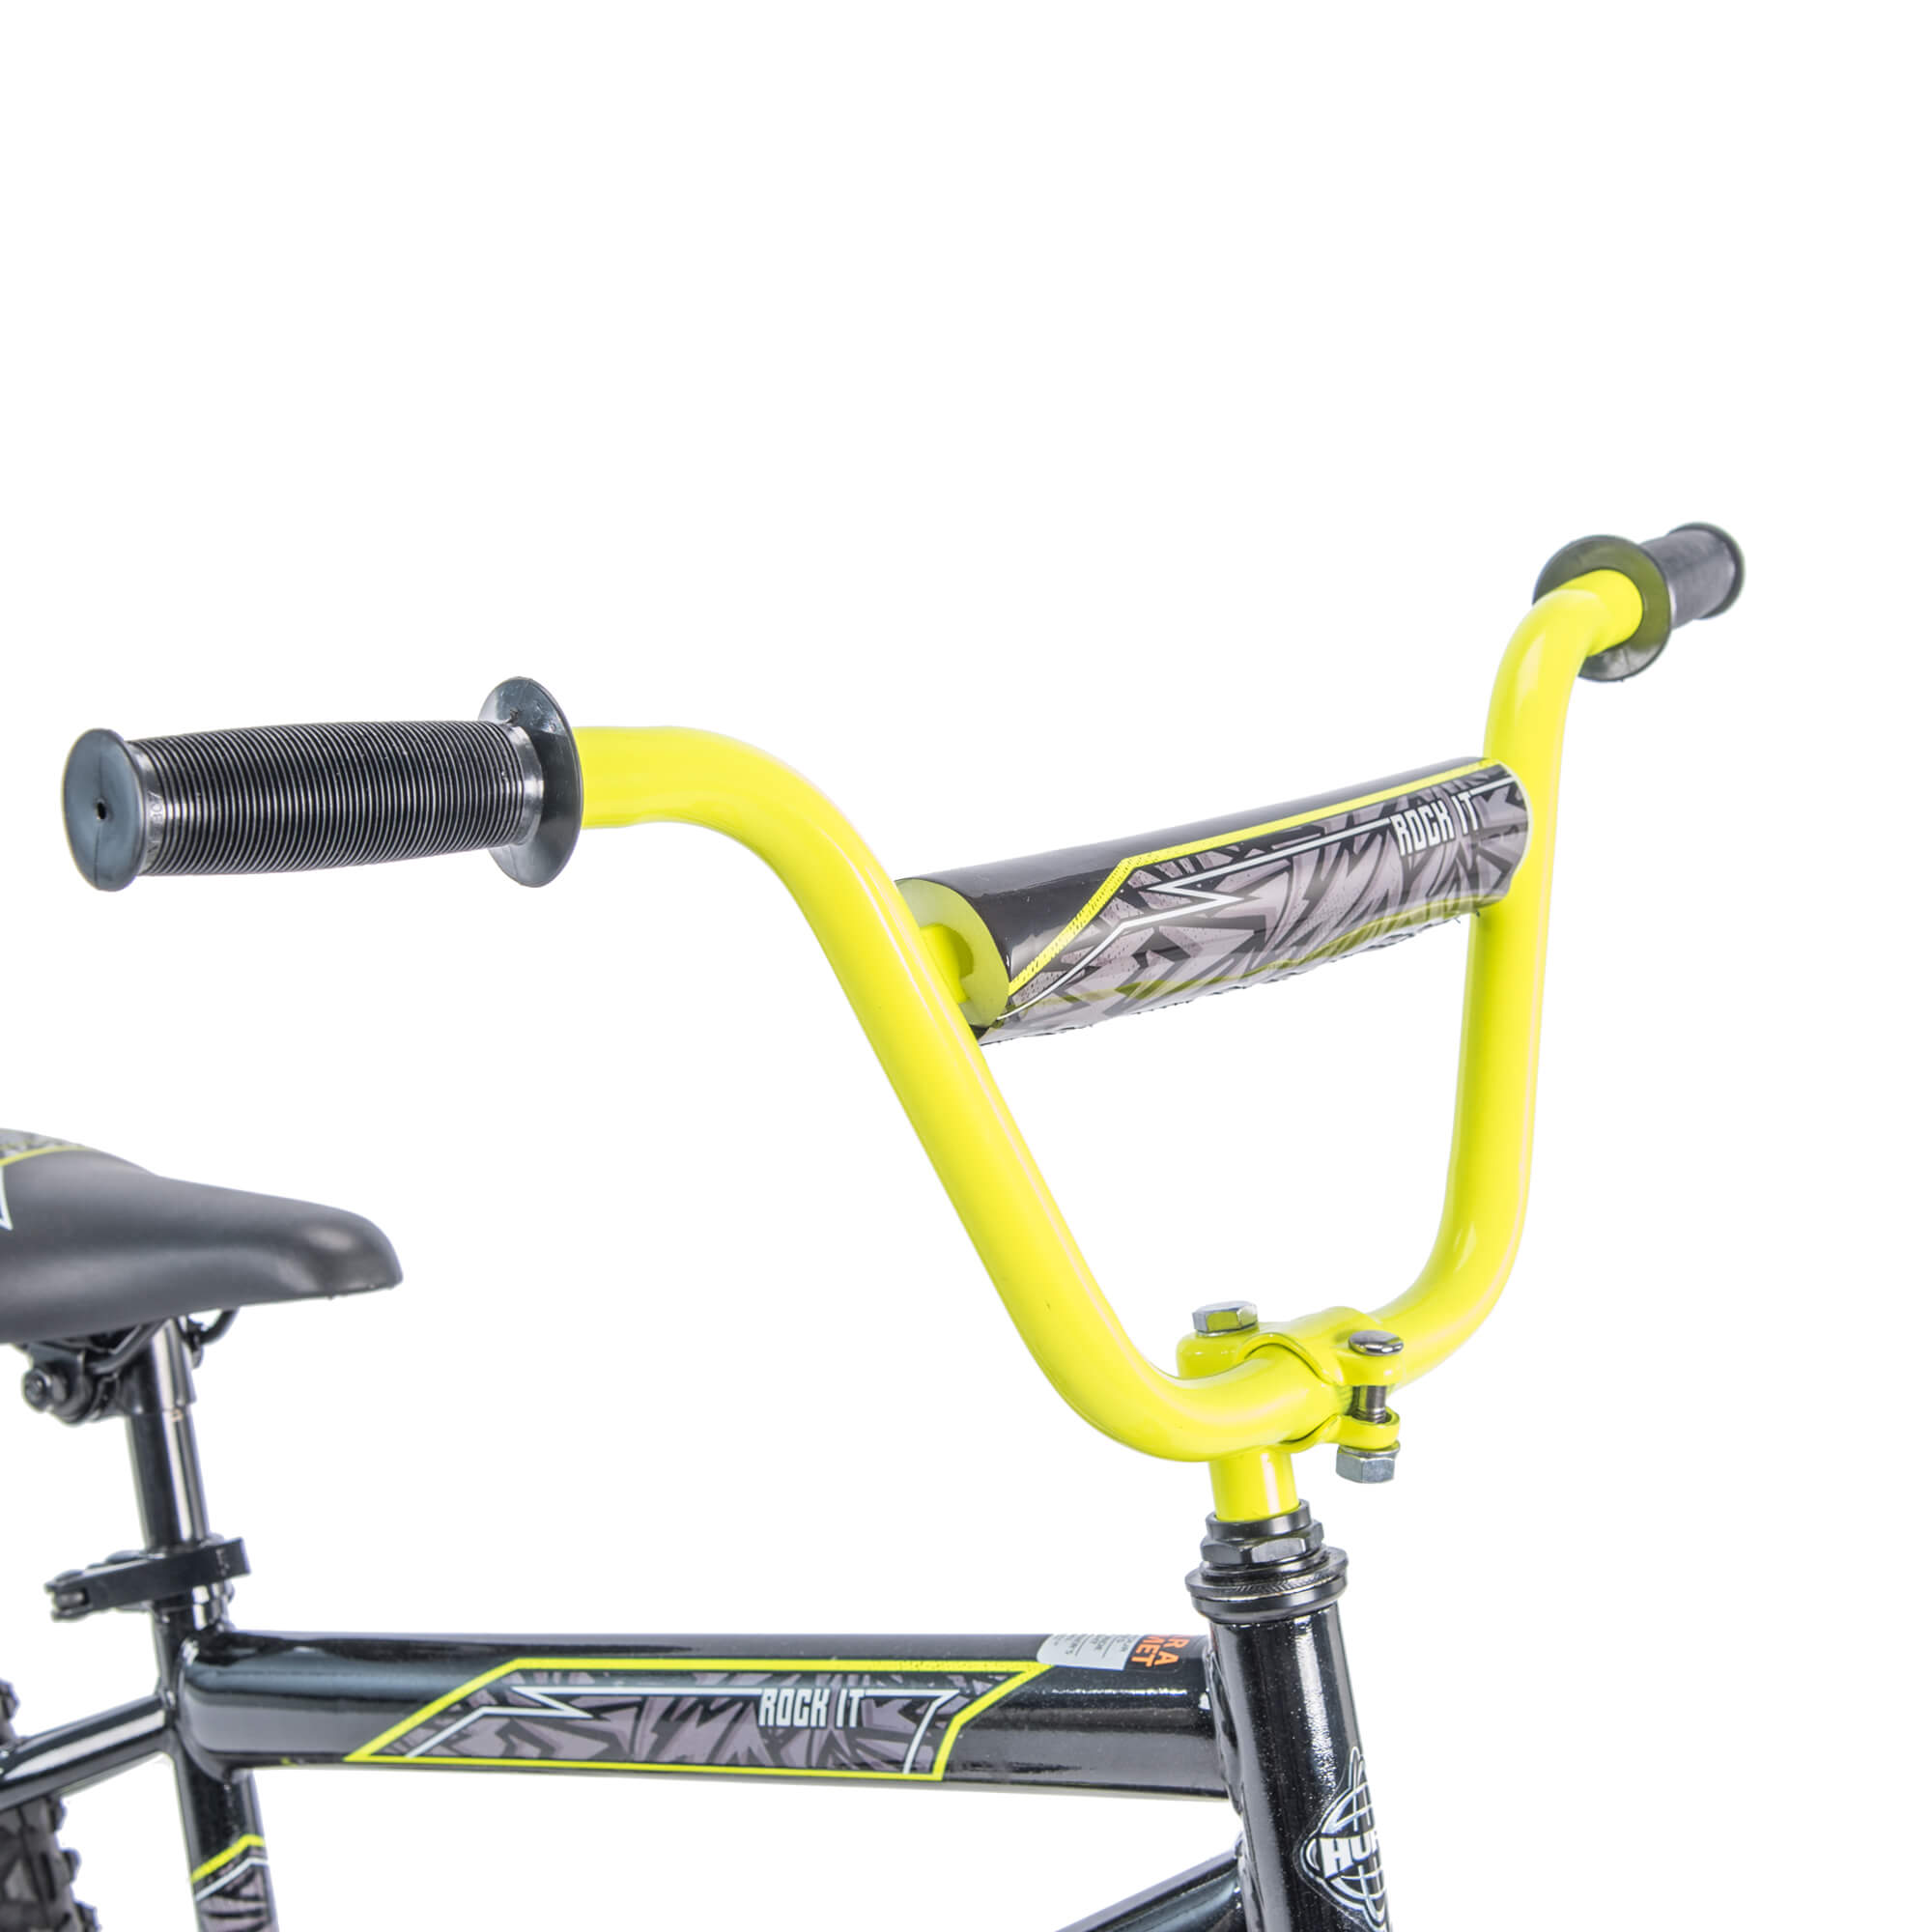 Huffy 20 In. Rock It Boys' Bike, Metallic Black with Neon Yellow Accents - image 3 of 5